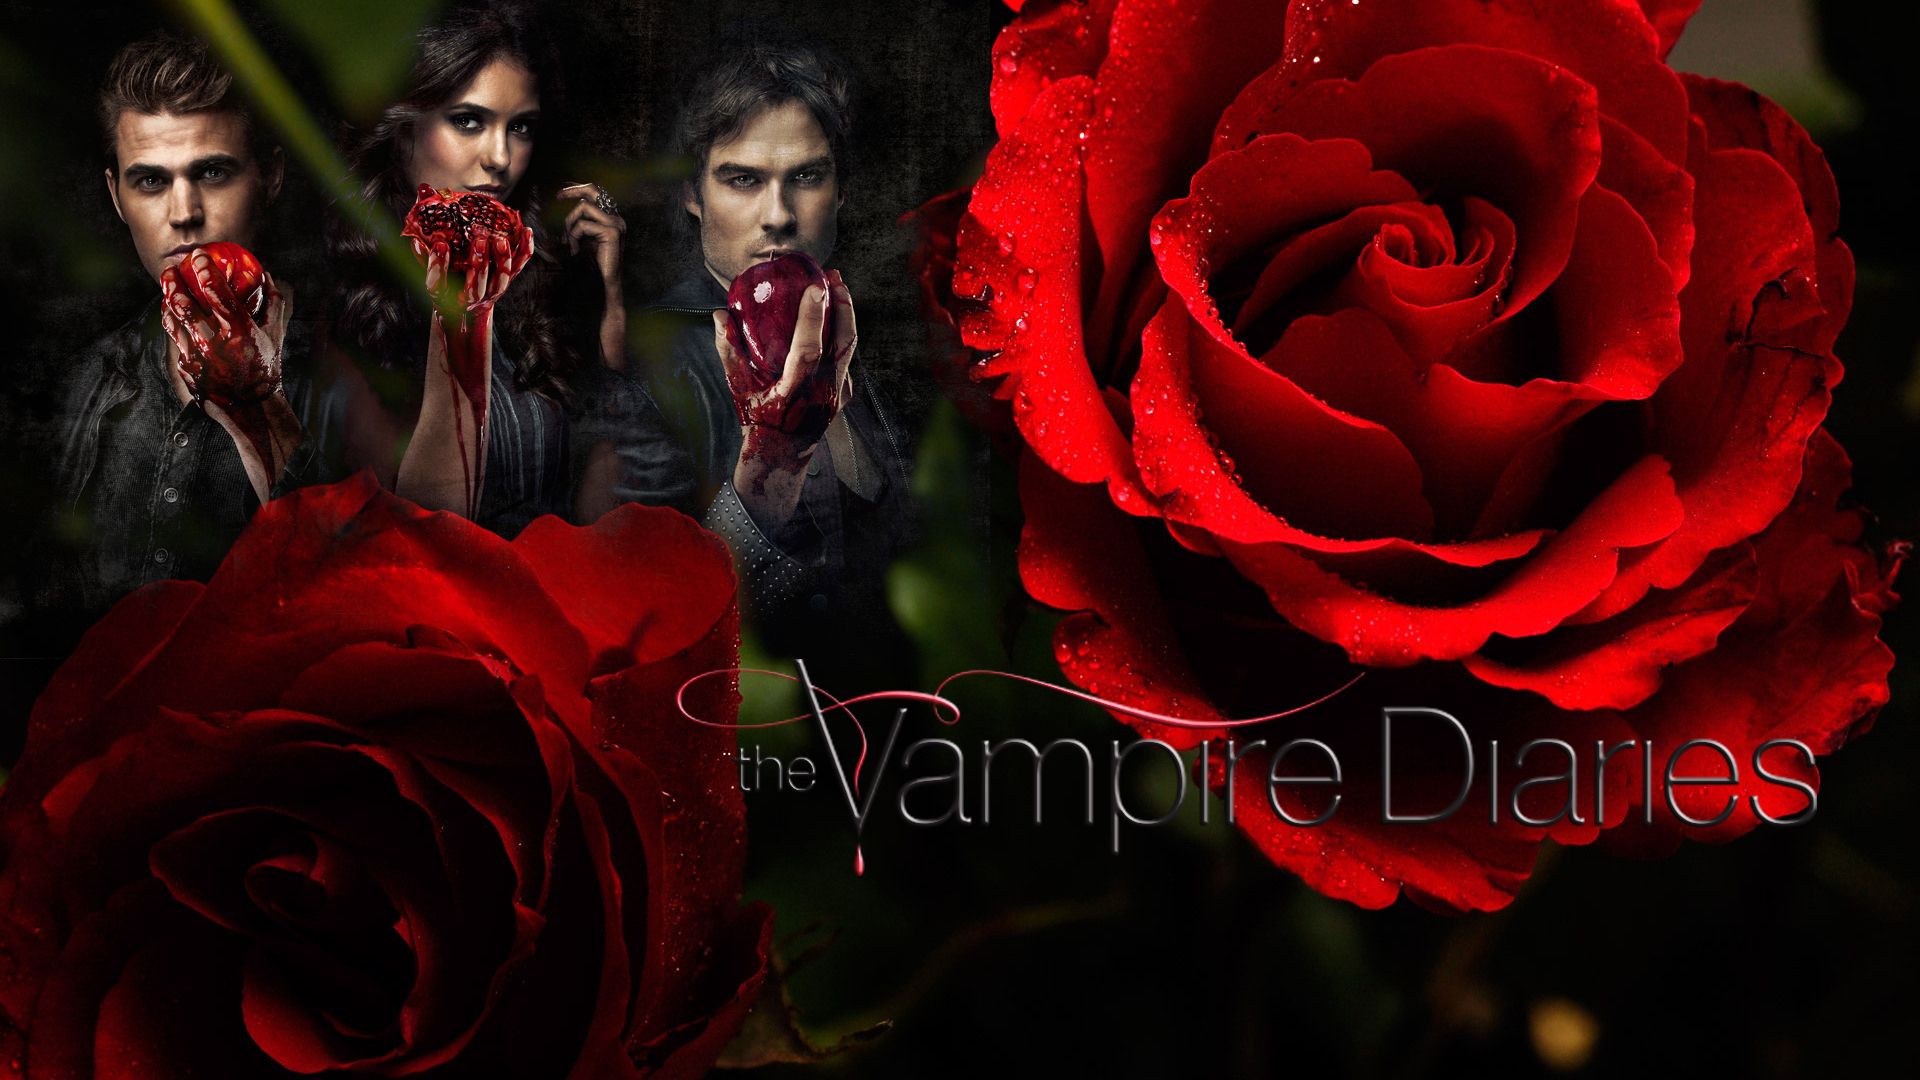 Vampire Diaries Wallpapers High Resolution and Quality Download